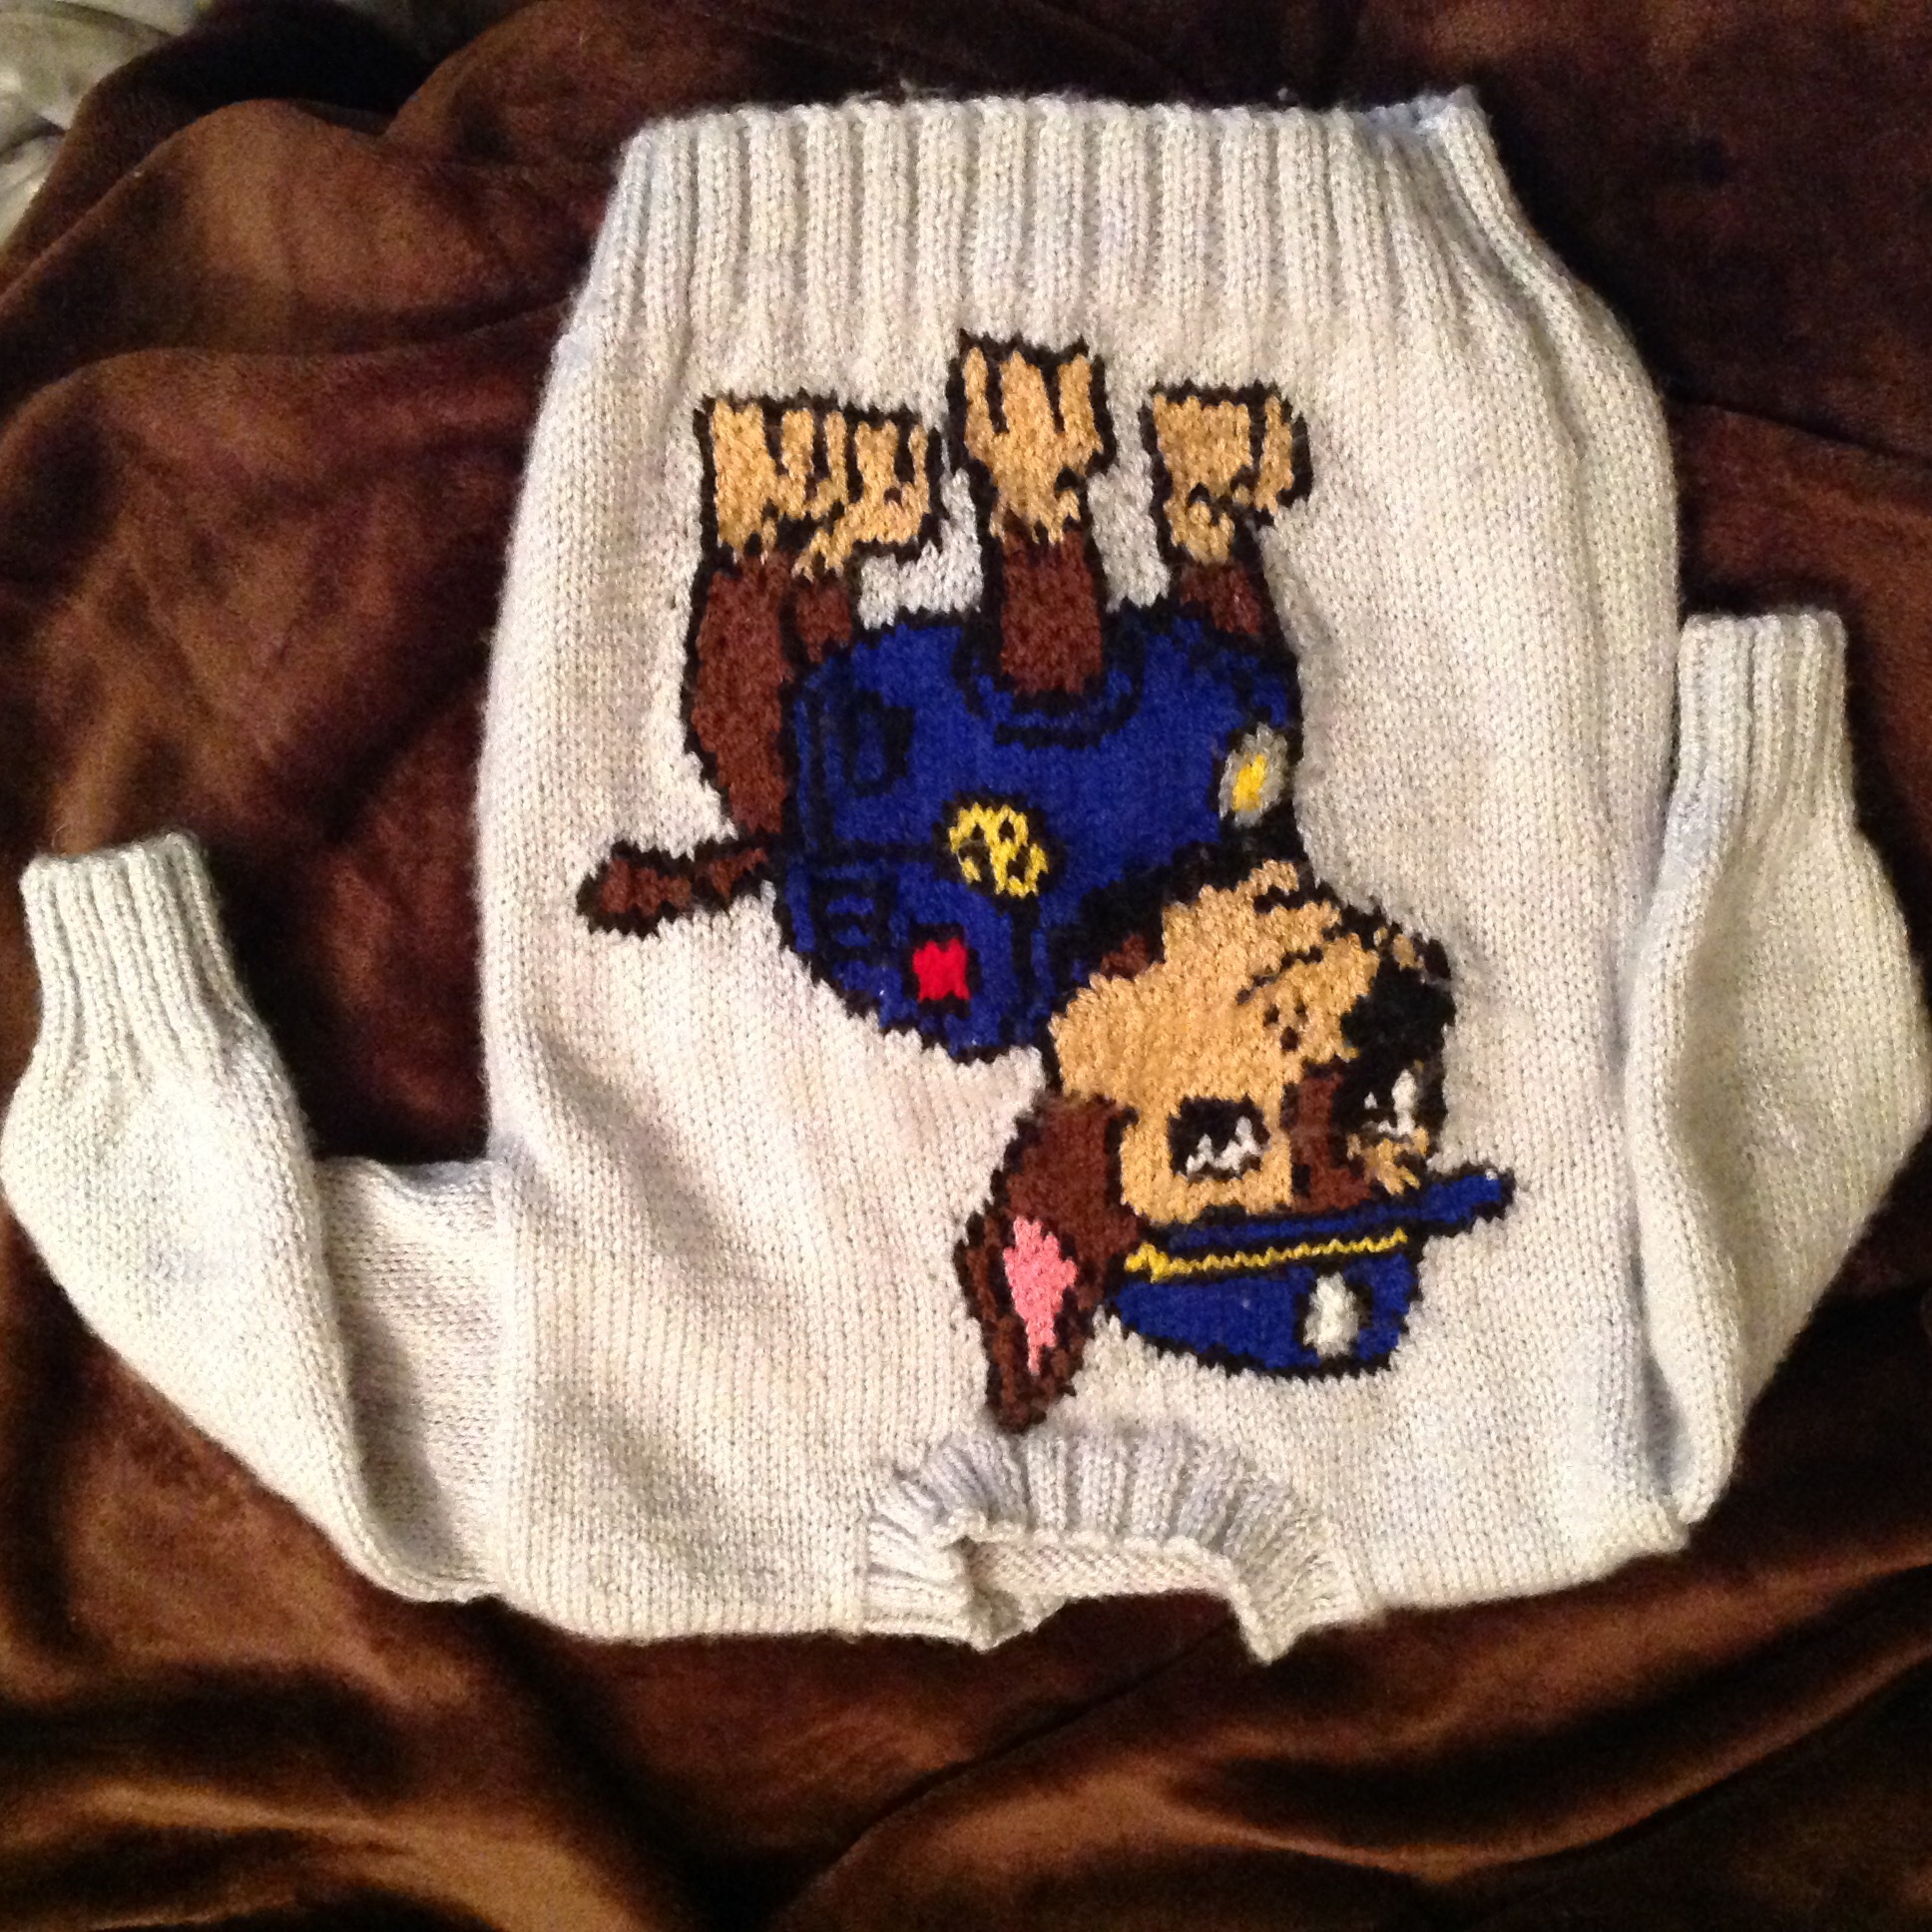 Paw Patrol jumper Chase knitting project by Mary Q